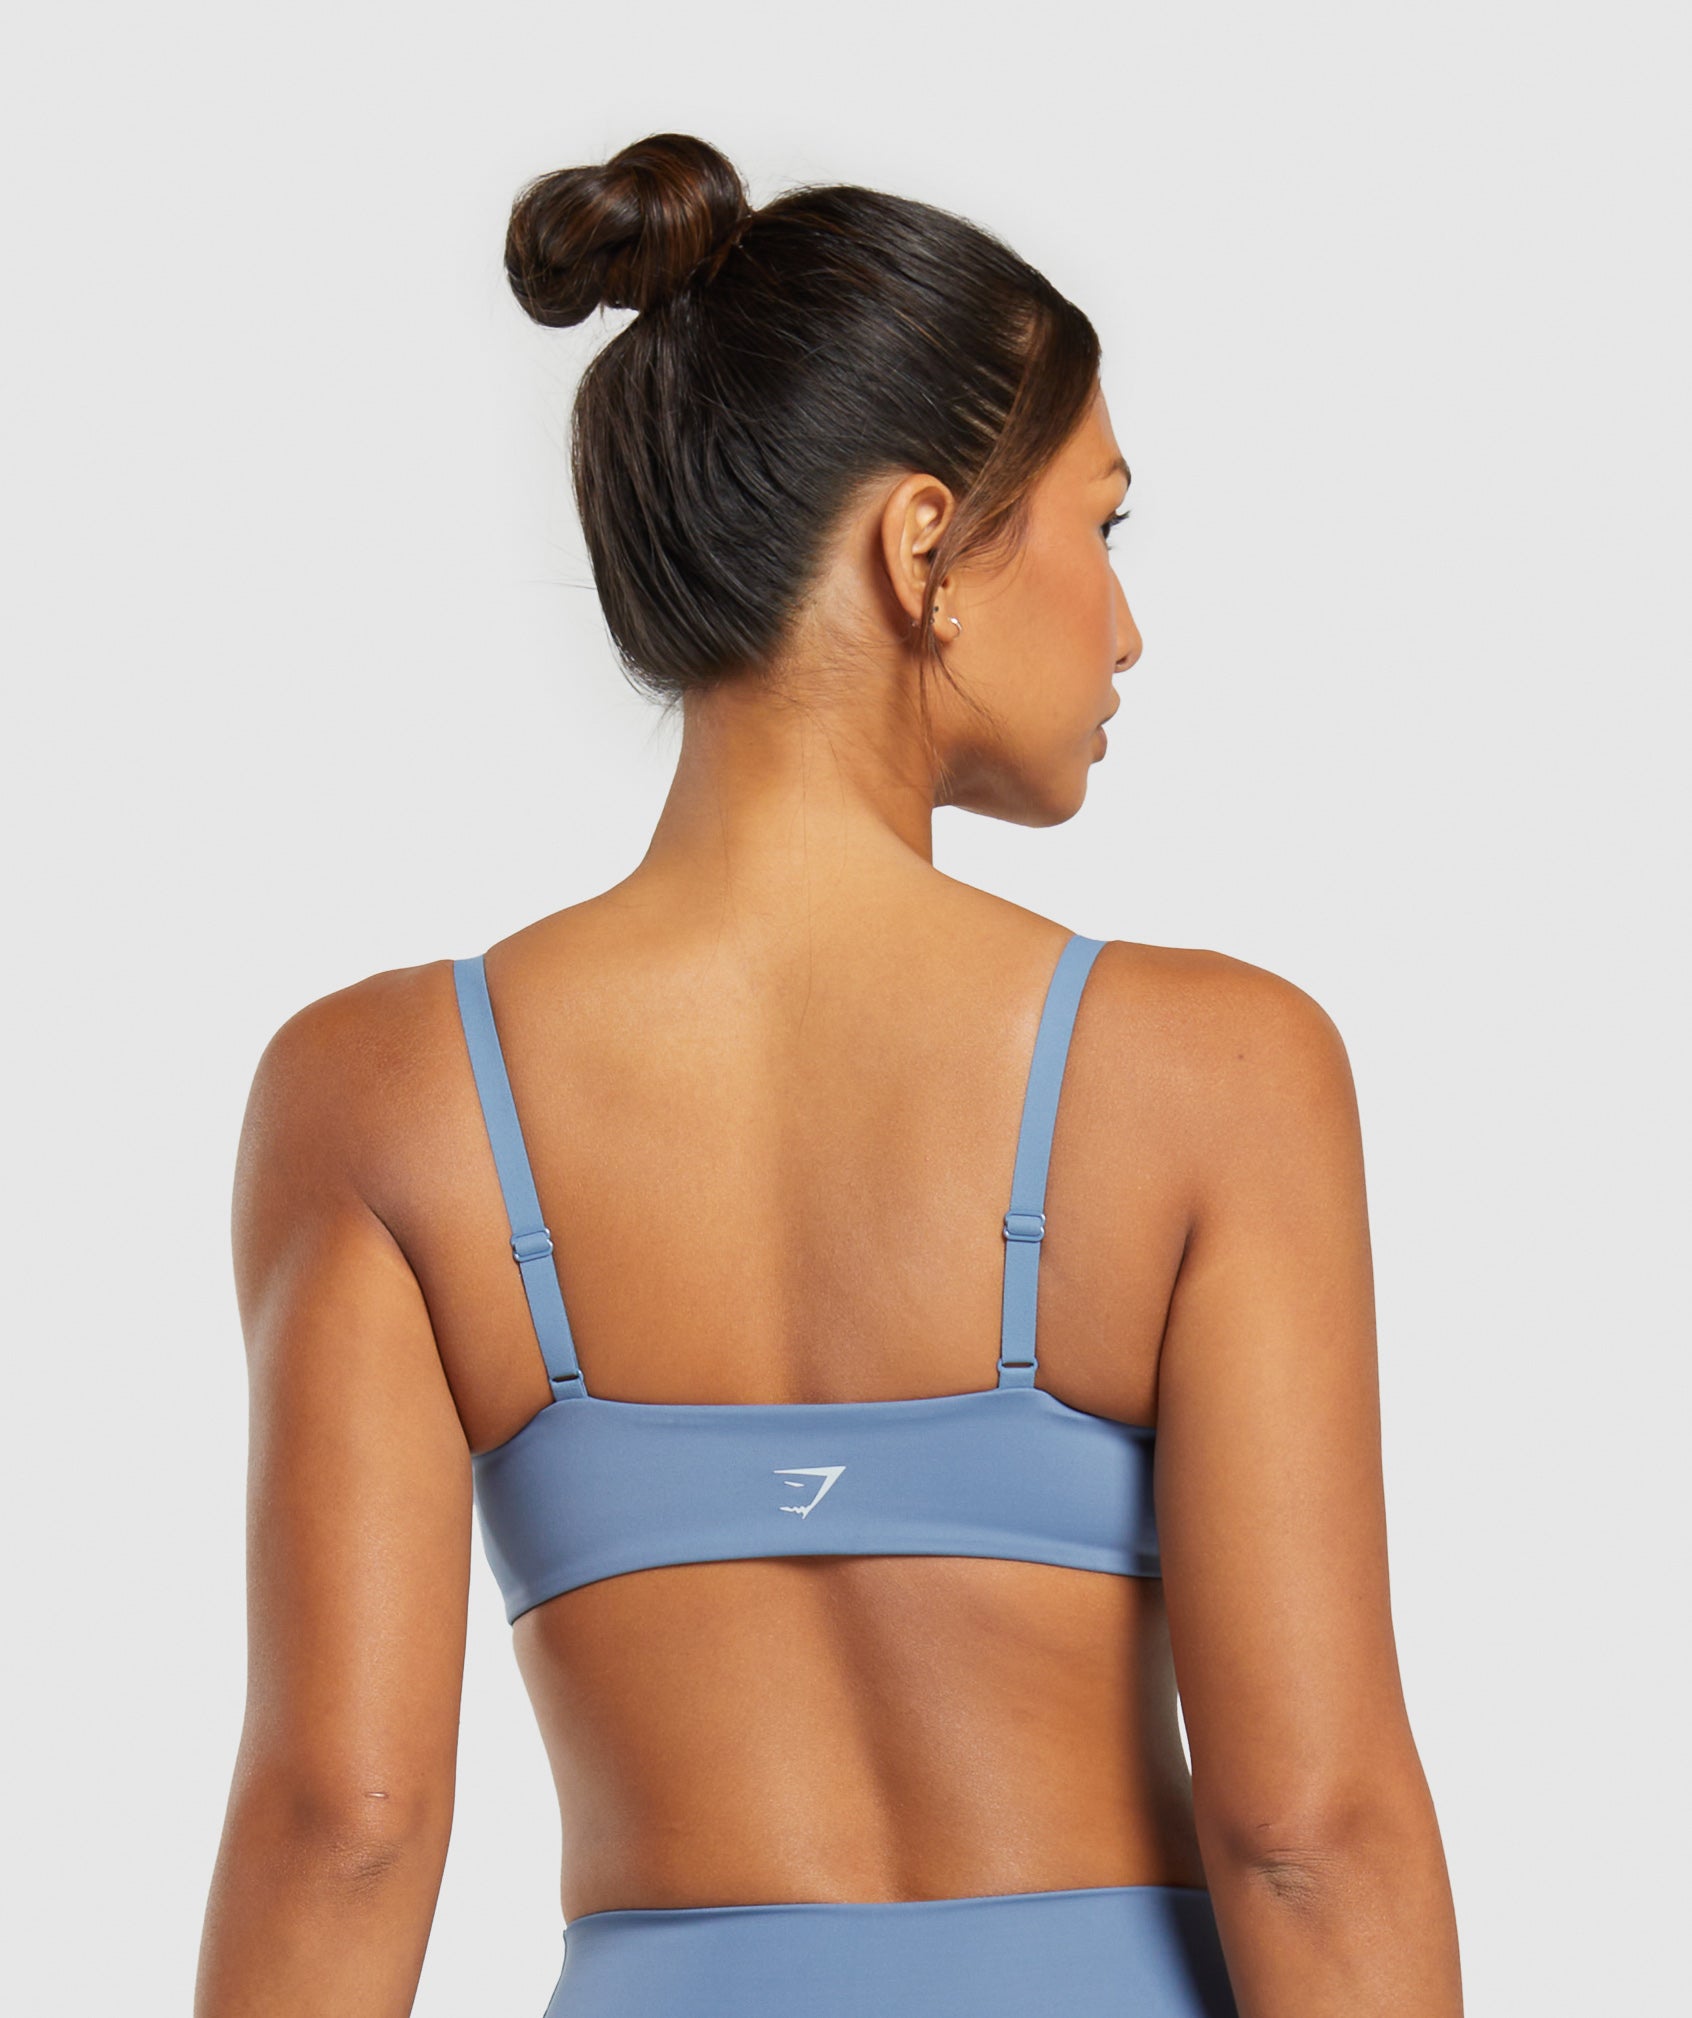 Women's Matching Workout Sets – Gym sets from Gymshark